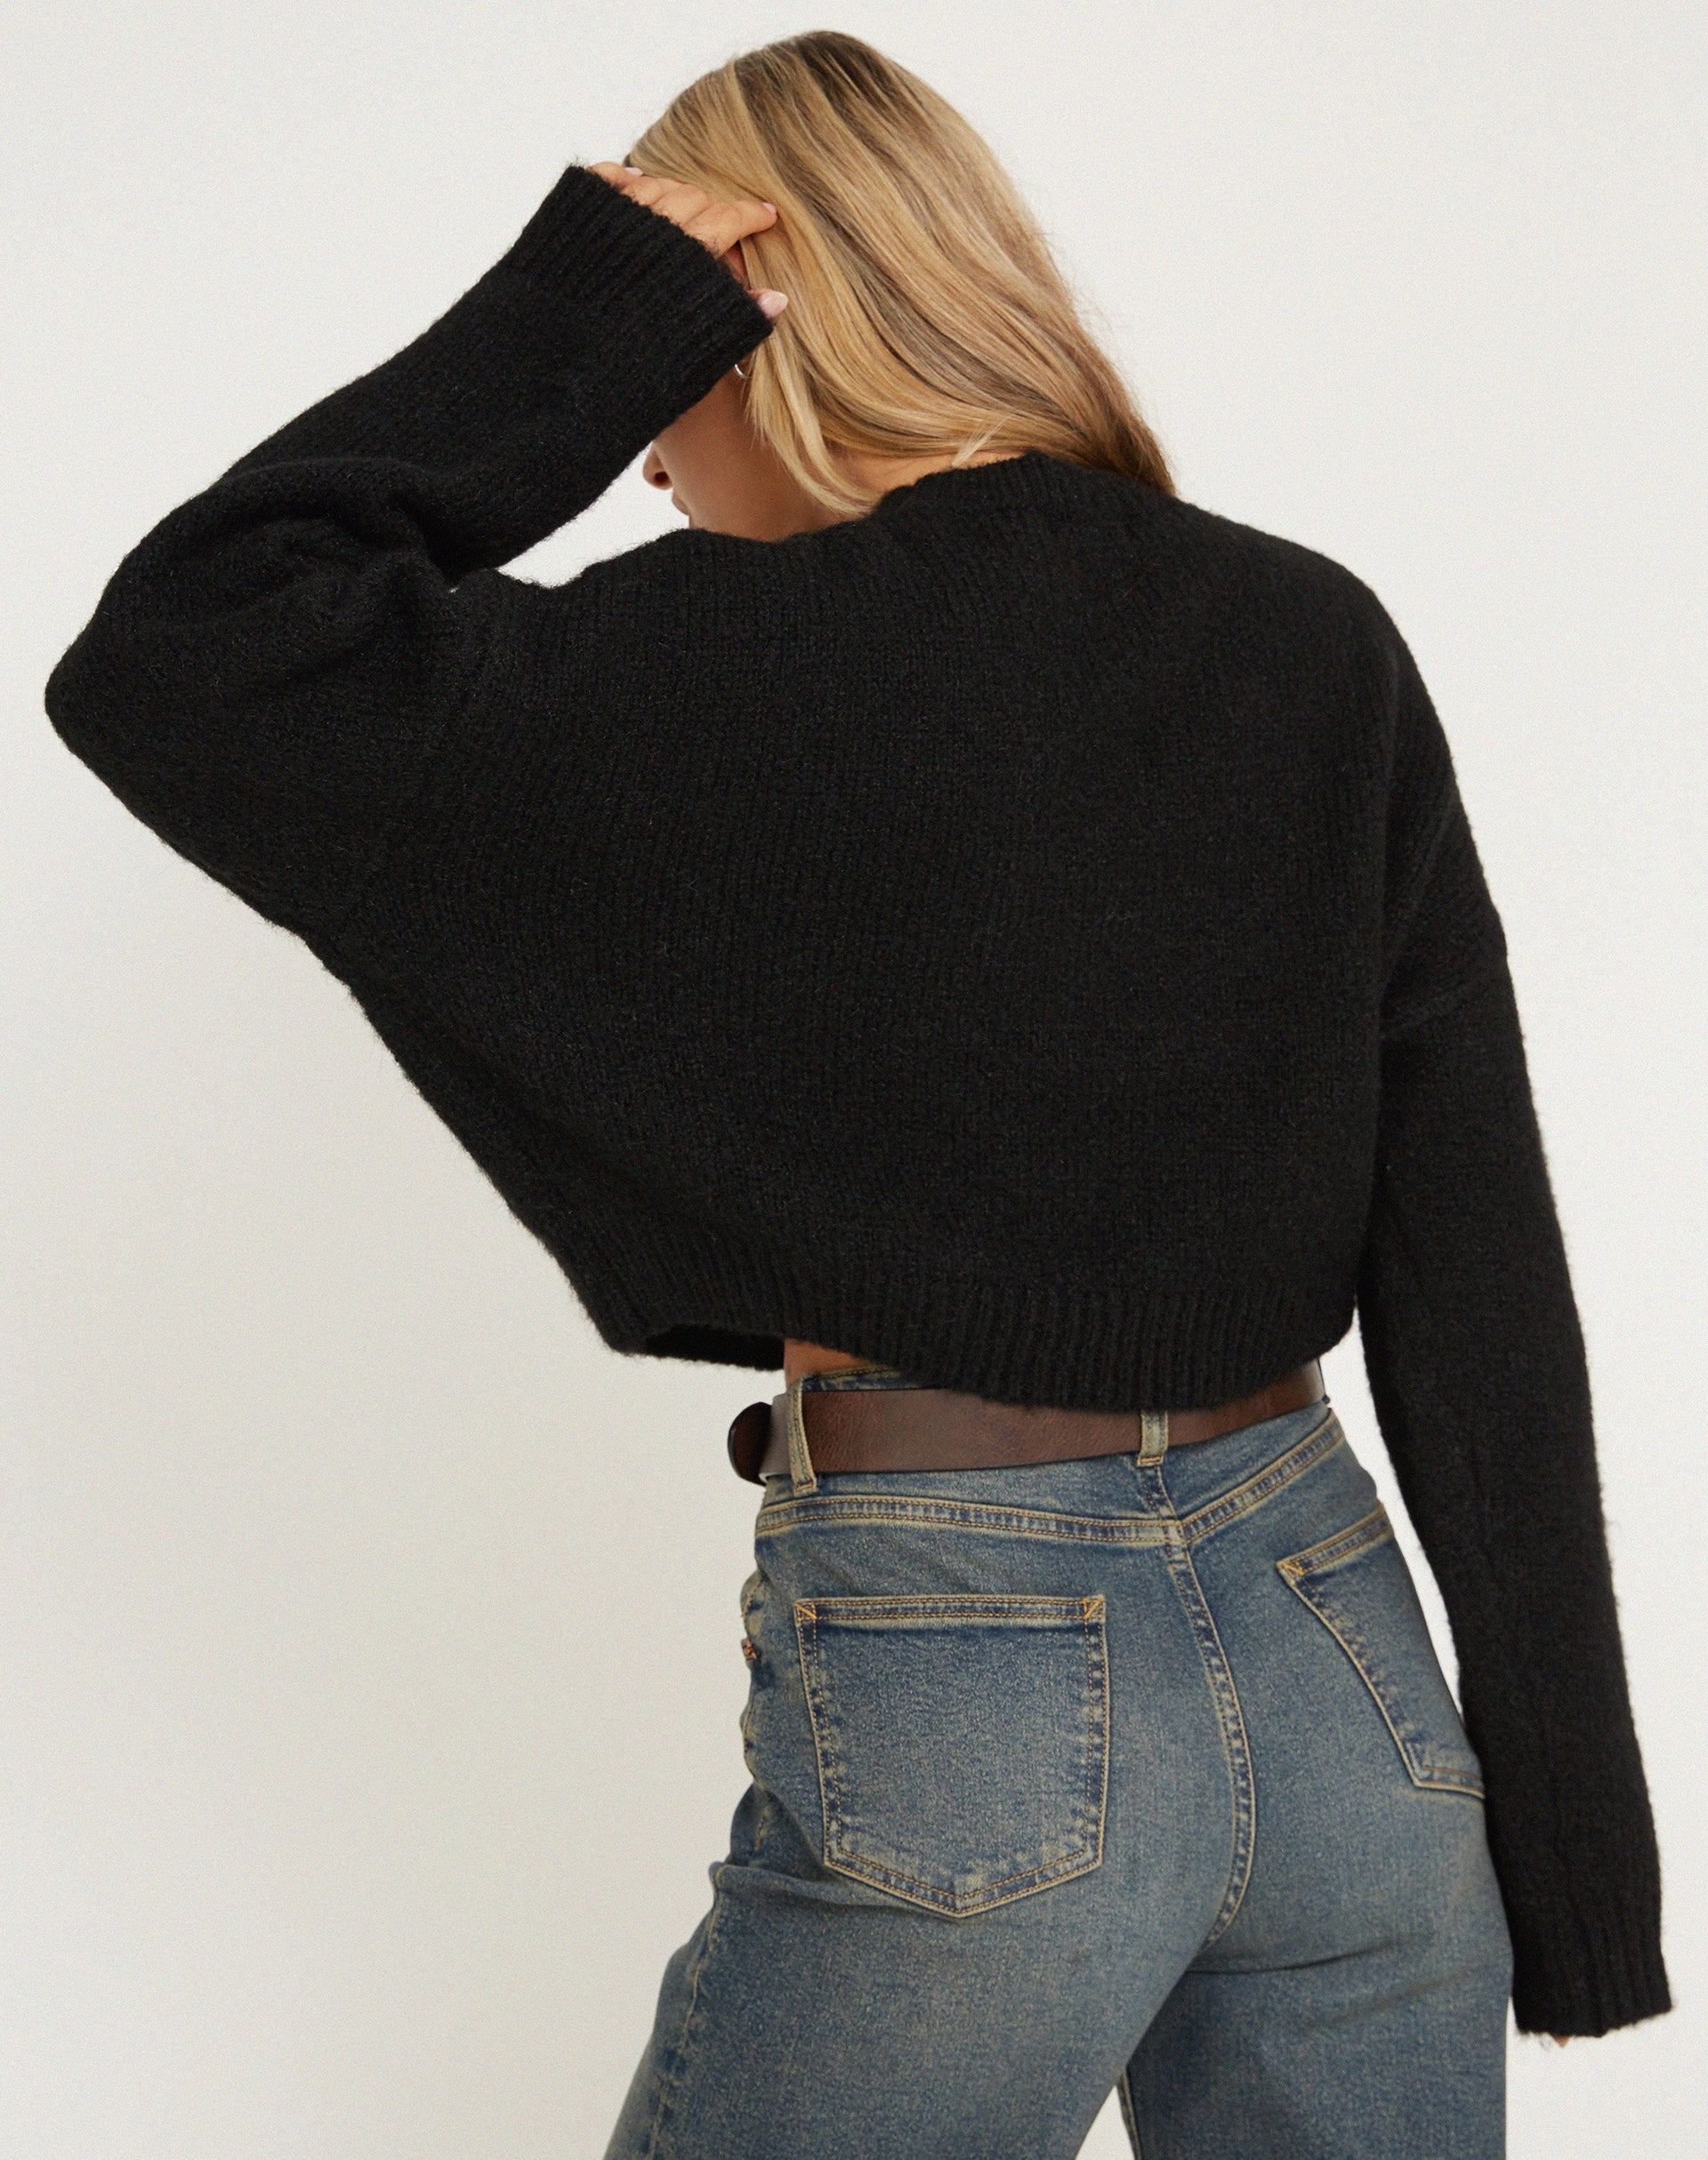 image of Munella Knitted Jumper in Black